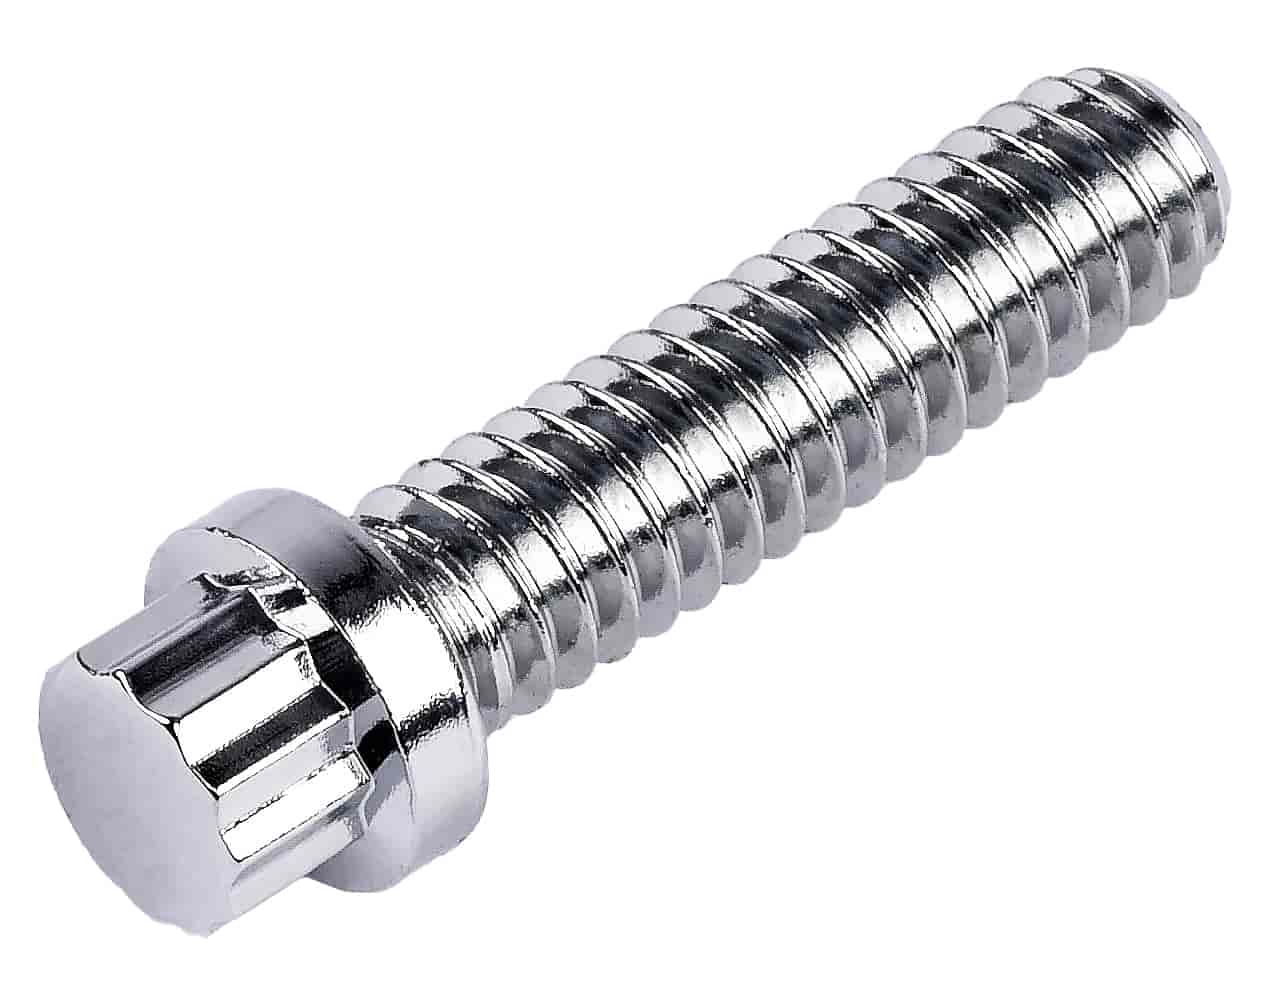 12-Point Fastener [1/4 in. -20 Thread x 1 in. Length]